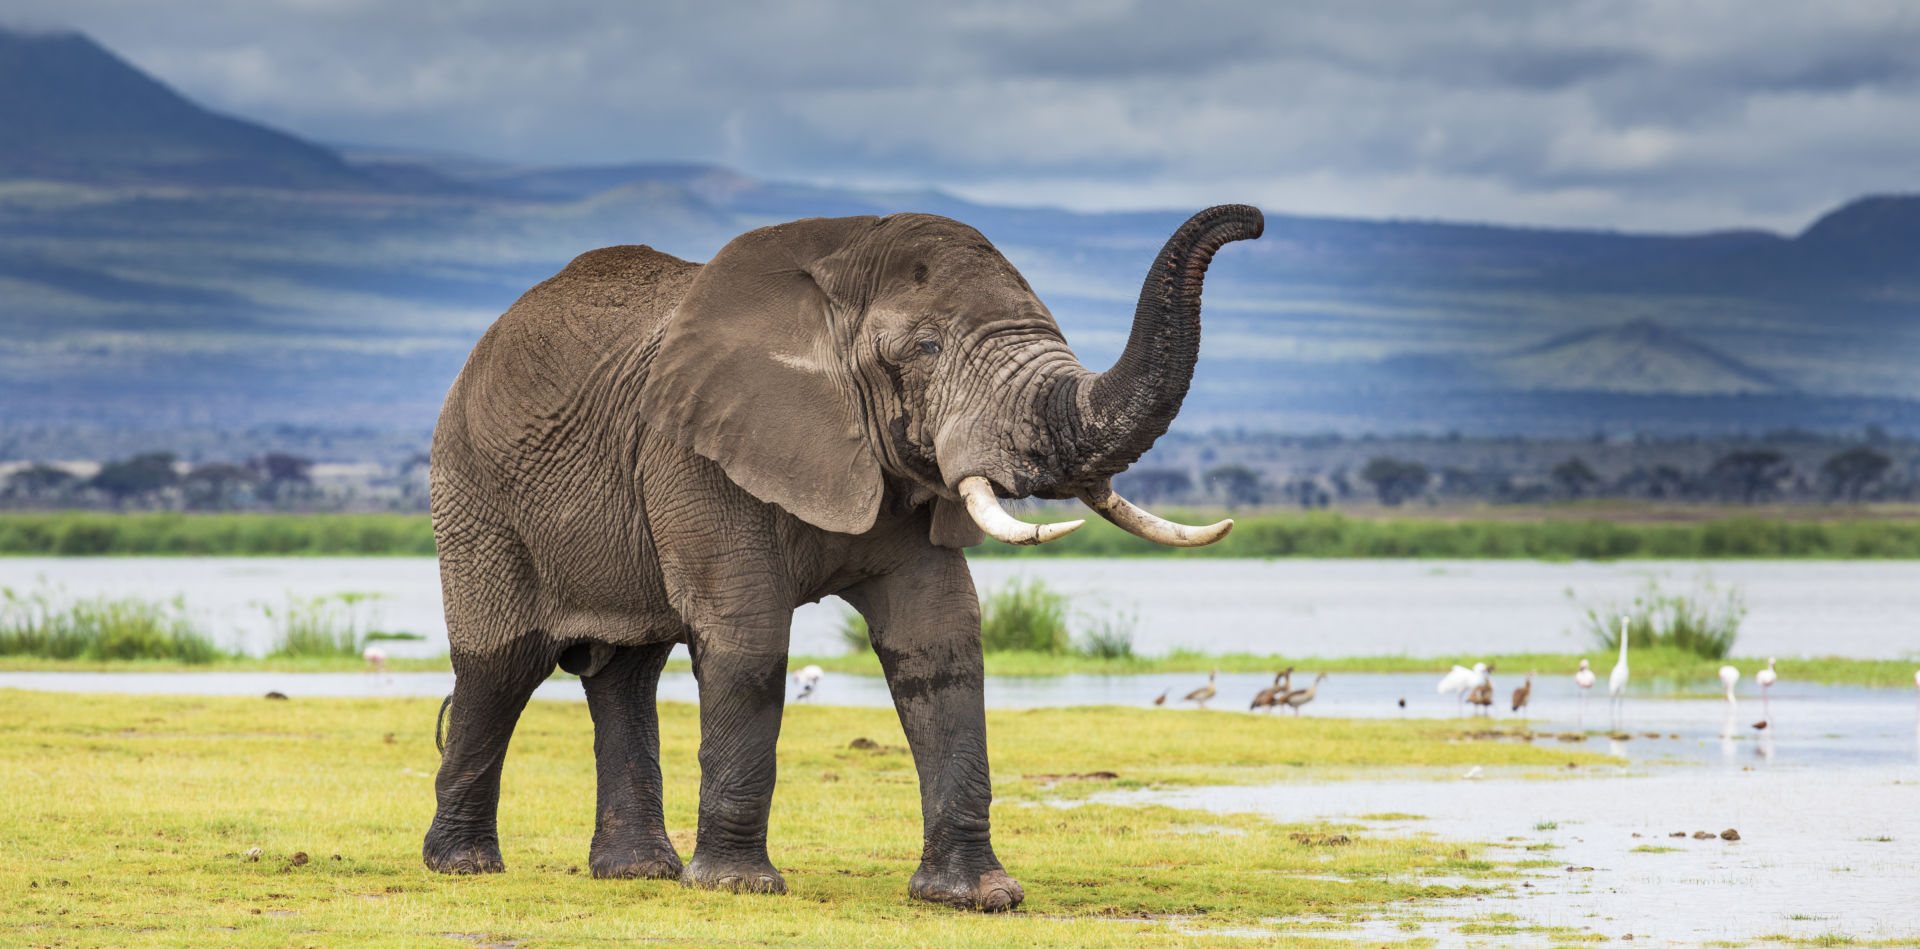 Donate now and you could help save African elephants